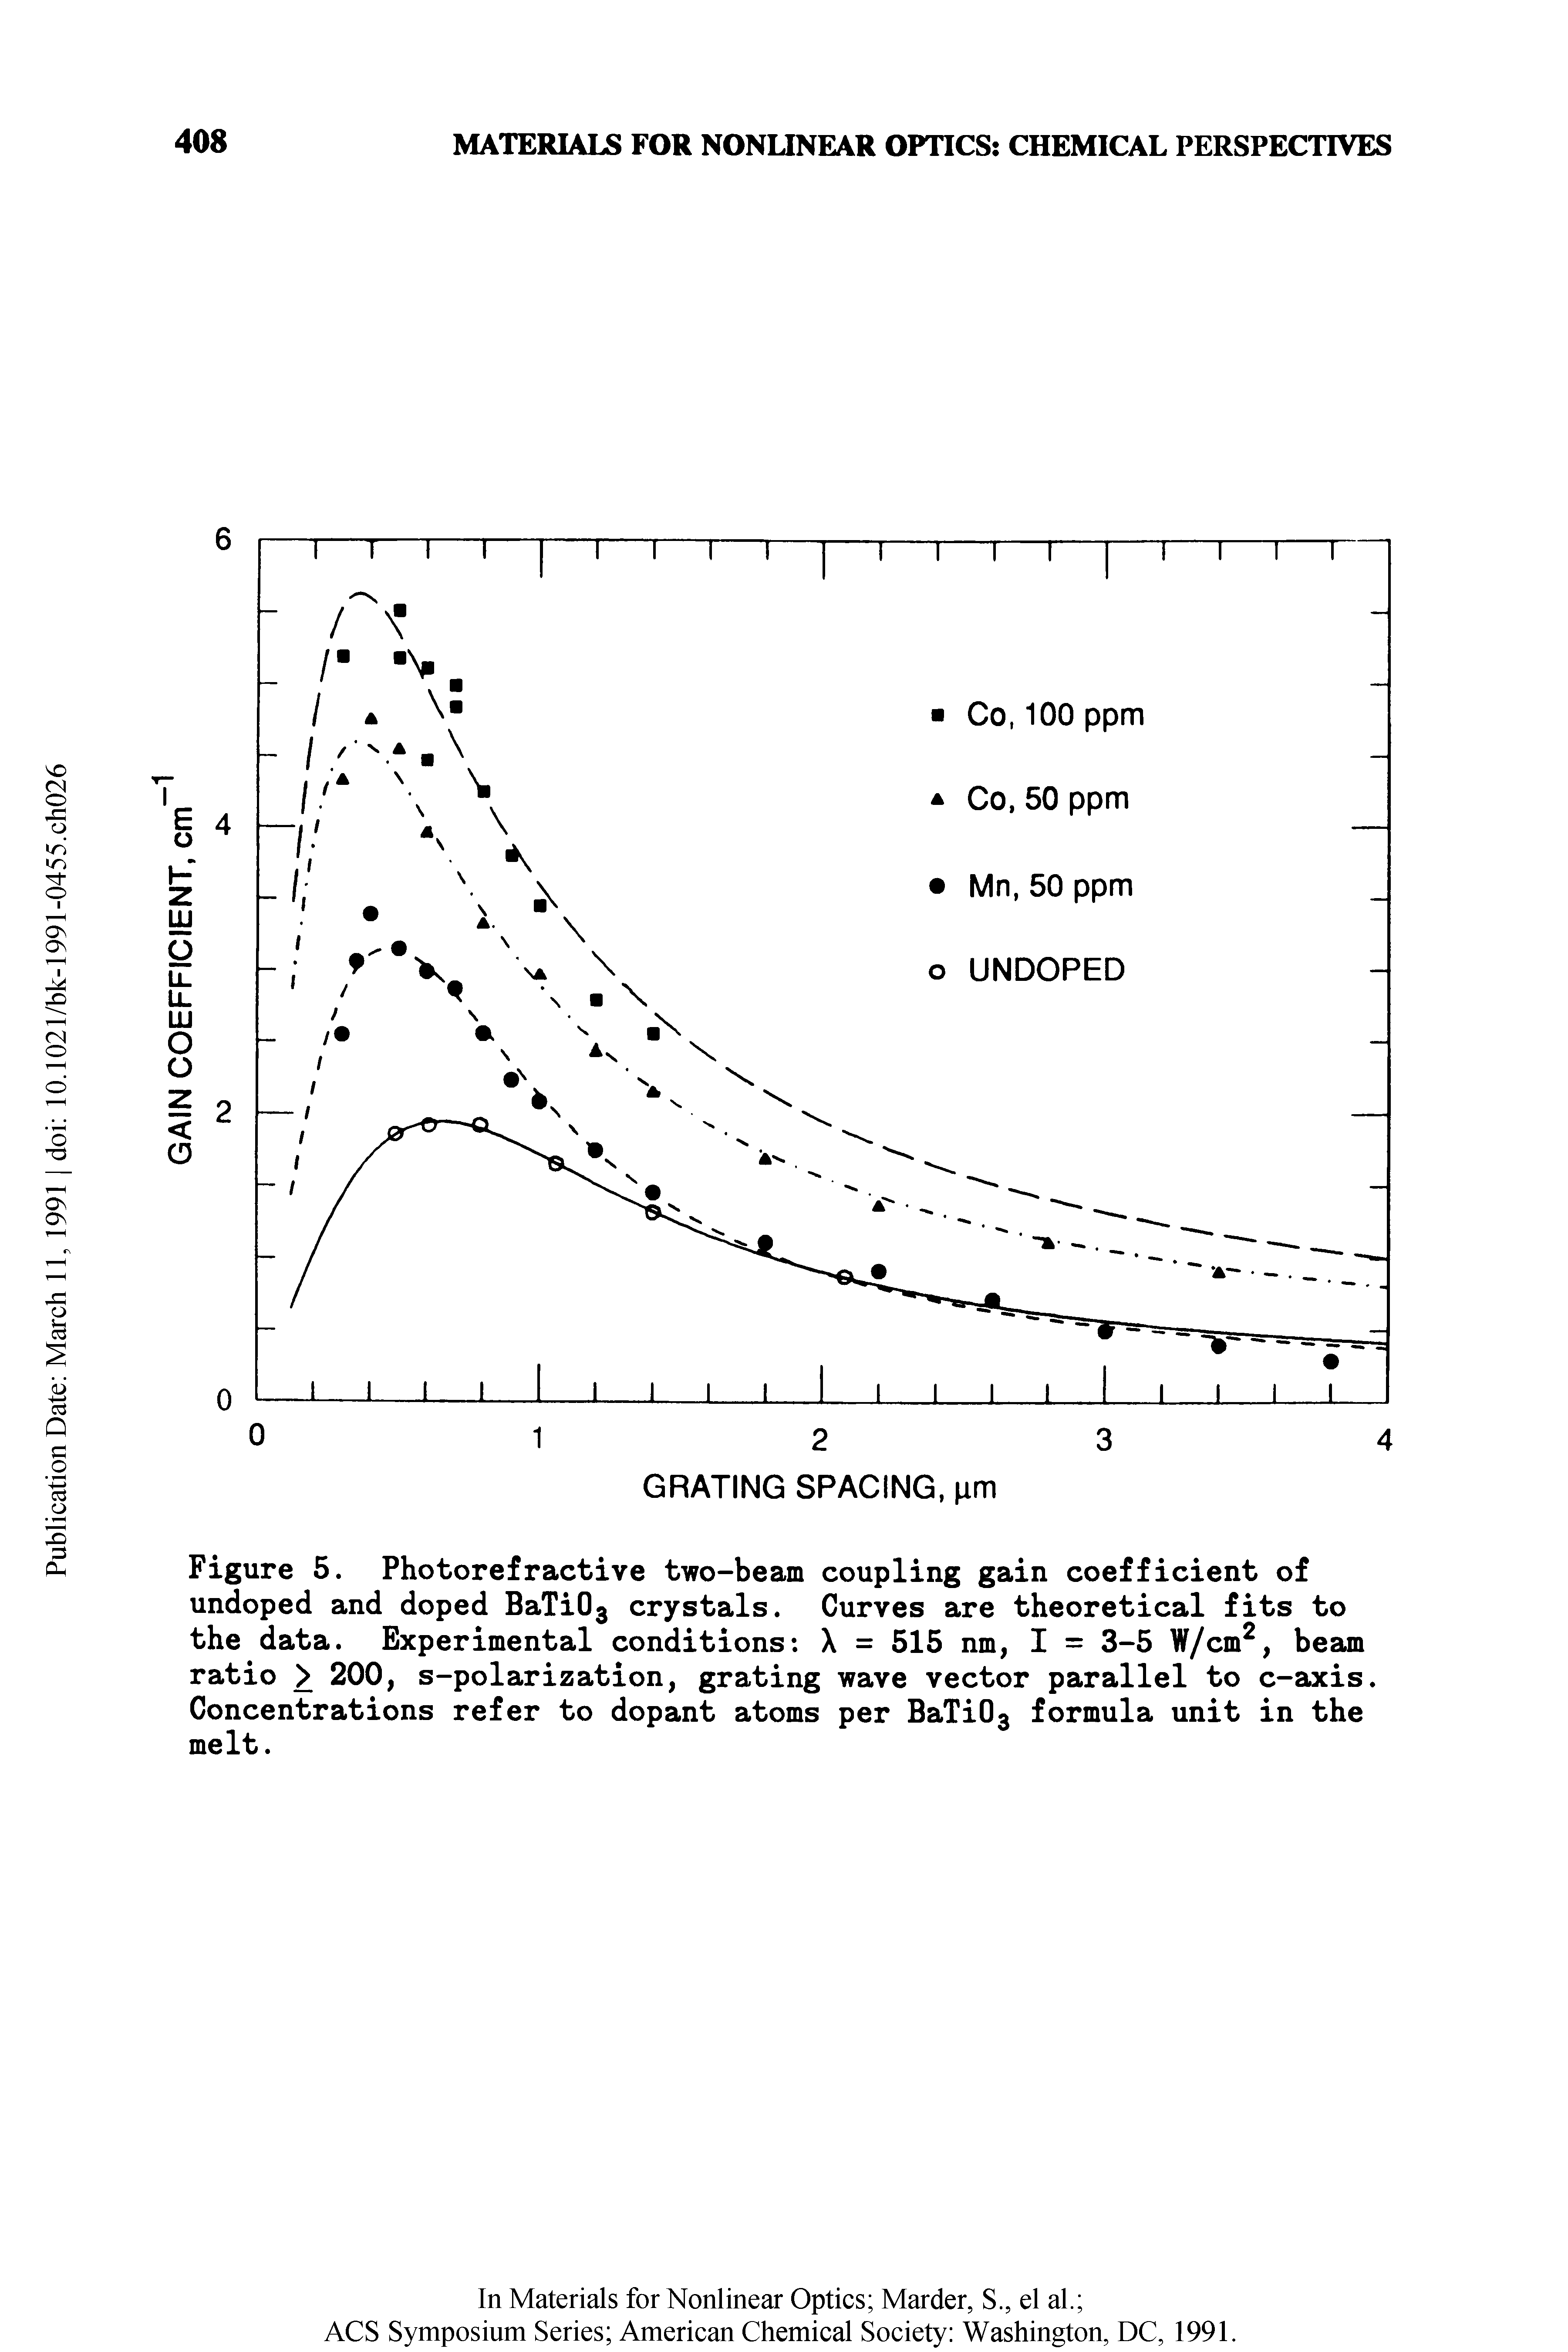 Figure 5. Photorefractive two-beam coupling gain coefficient of undoped and doped BaTi03 crystals. Curves are theoretical fits to the data. Experimental conditions X = 515 nm, I = 3-5 W/cm2, beam ratio > 200, s-polarization, grating wave vector parallel to c-axis Concentrations refer to dopant atoms per BaTi03 formula unit in the melt.